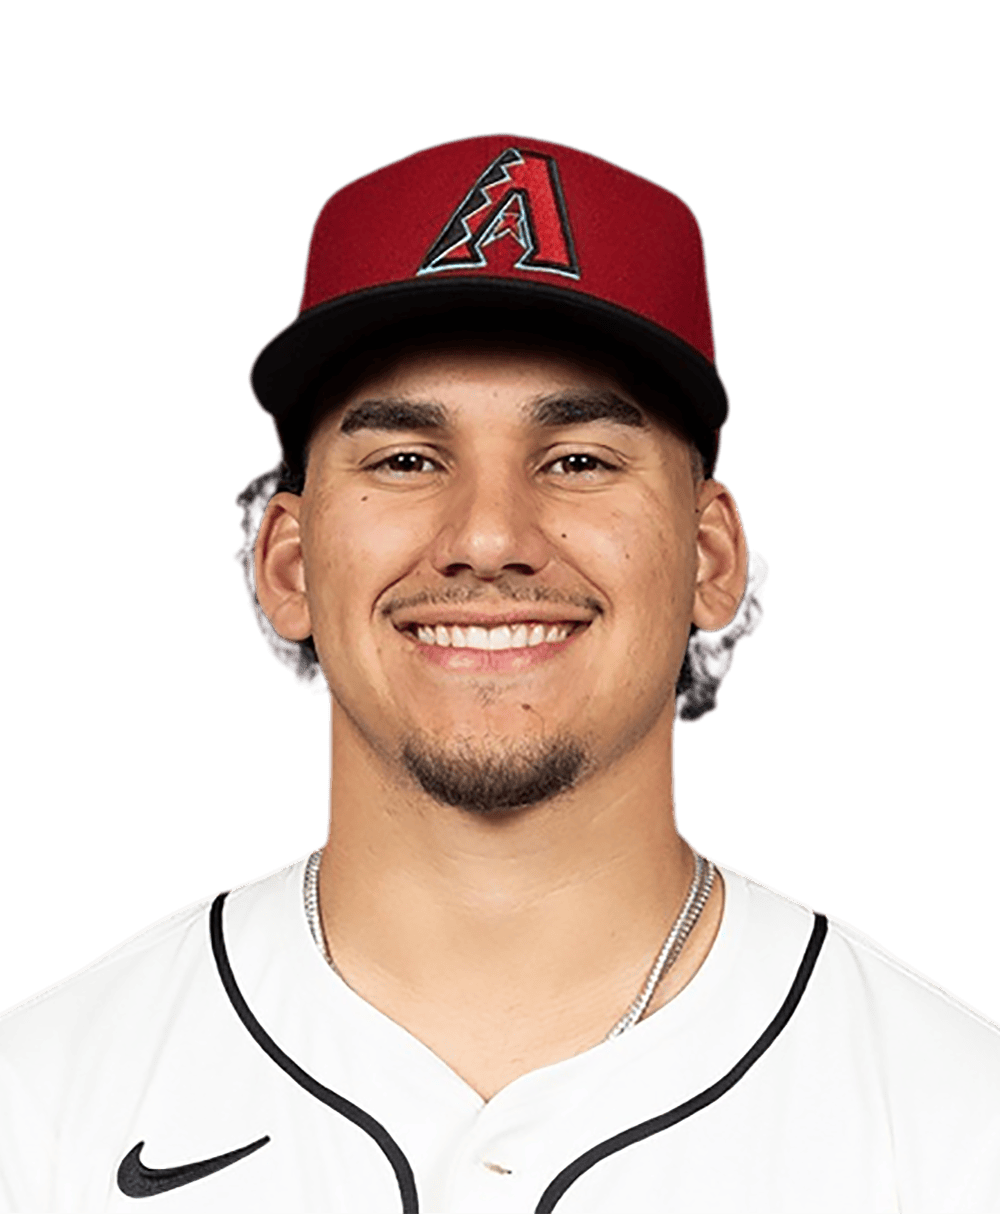 Diamondbacks outfielder Alek Thomas stops by to chat about the